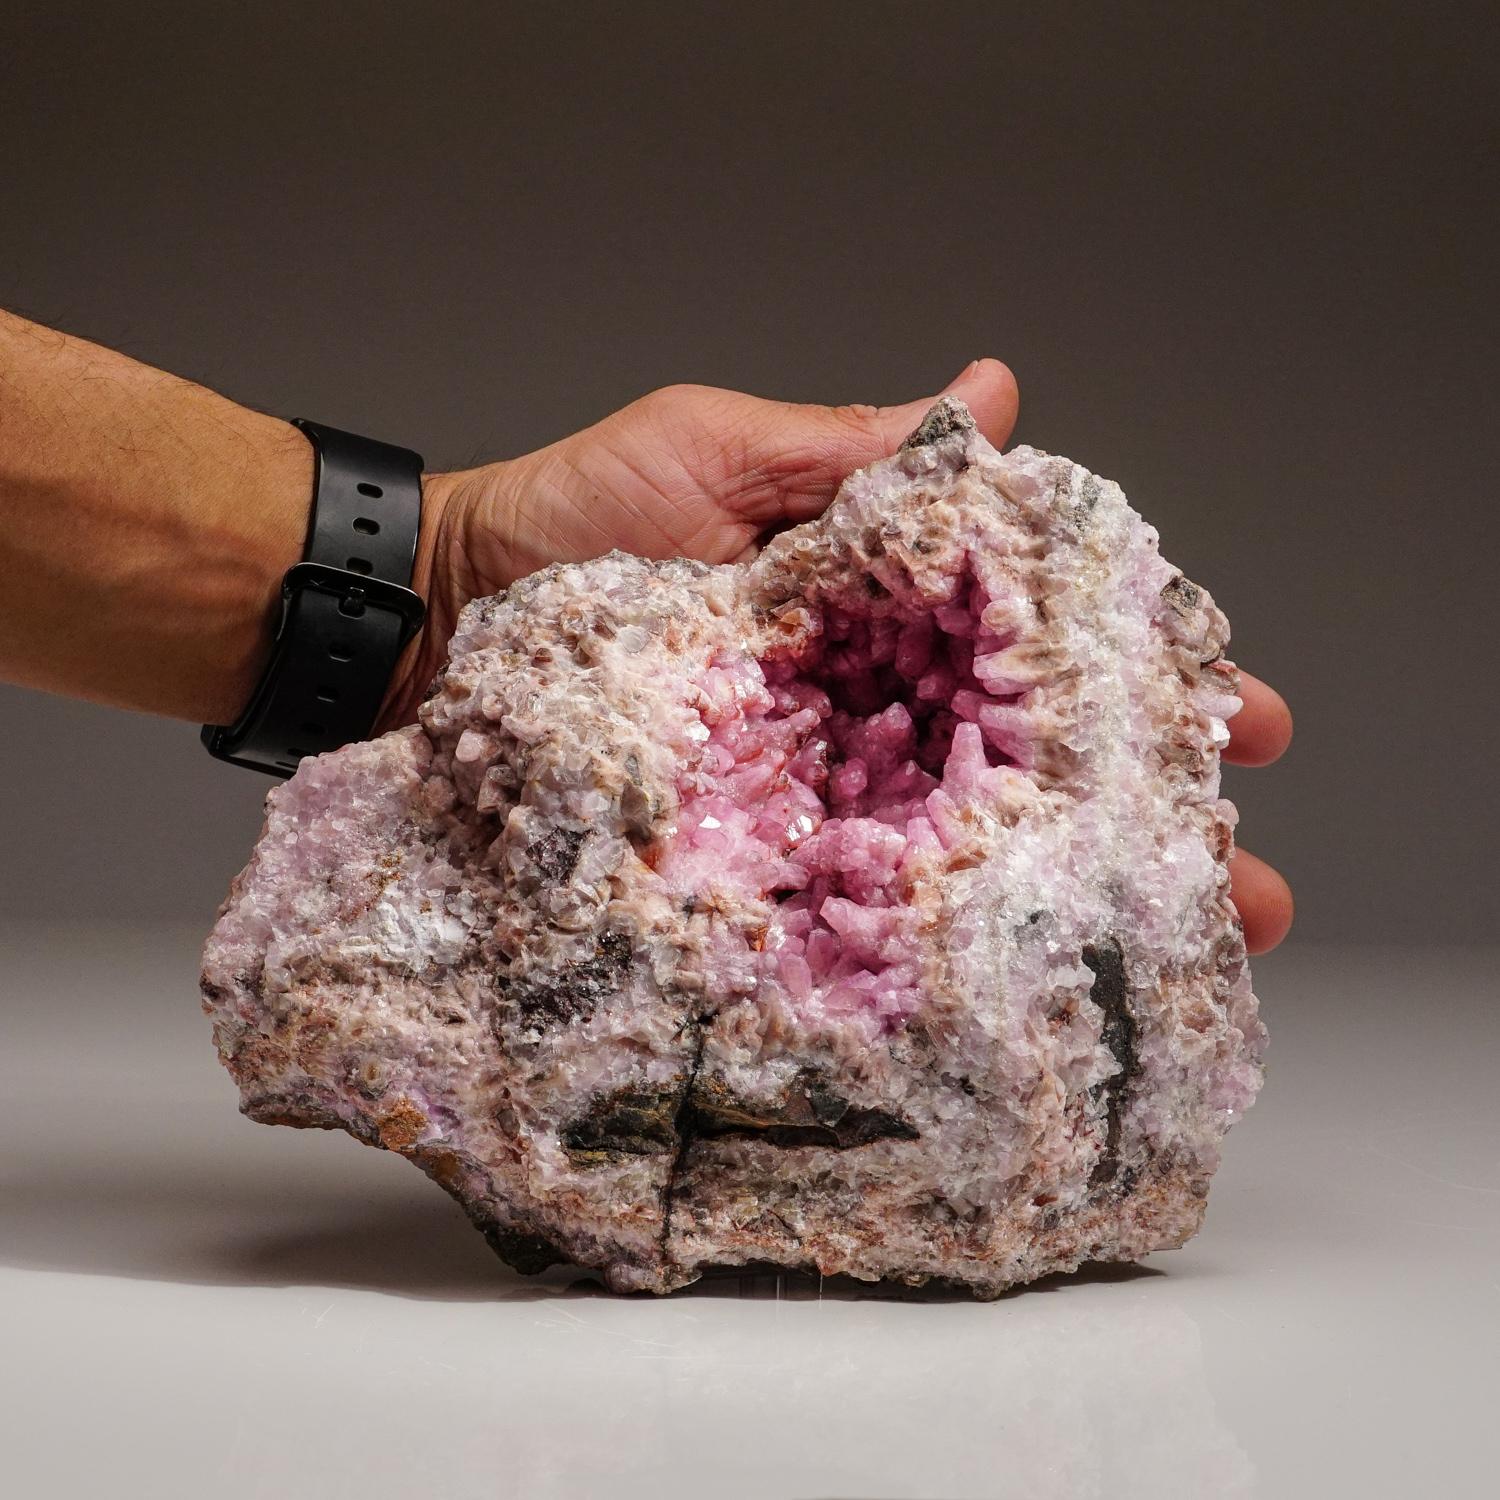 From Bou Azzer District, Anti-Atlas Mountains, Ouarzazate, Morocco

Lustrous rounded cluster of vibrant pink scalenohedral calcite crystals. The calcite is translucent to transparent with rich  pink color which is due to cobalt impurities. Fully